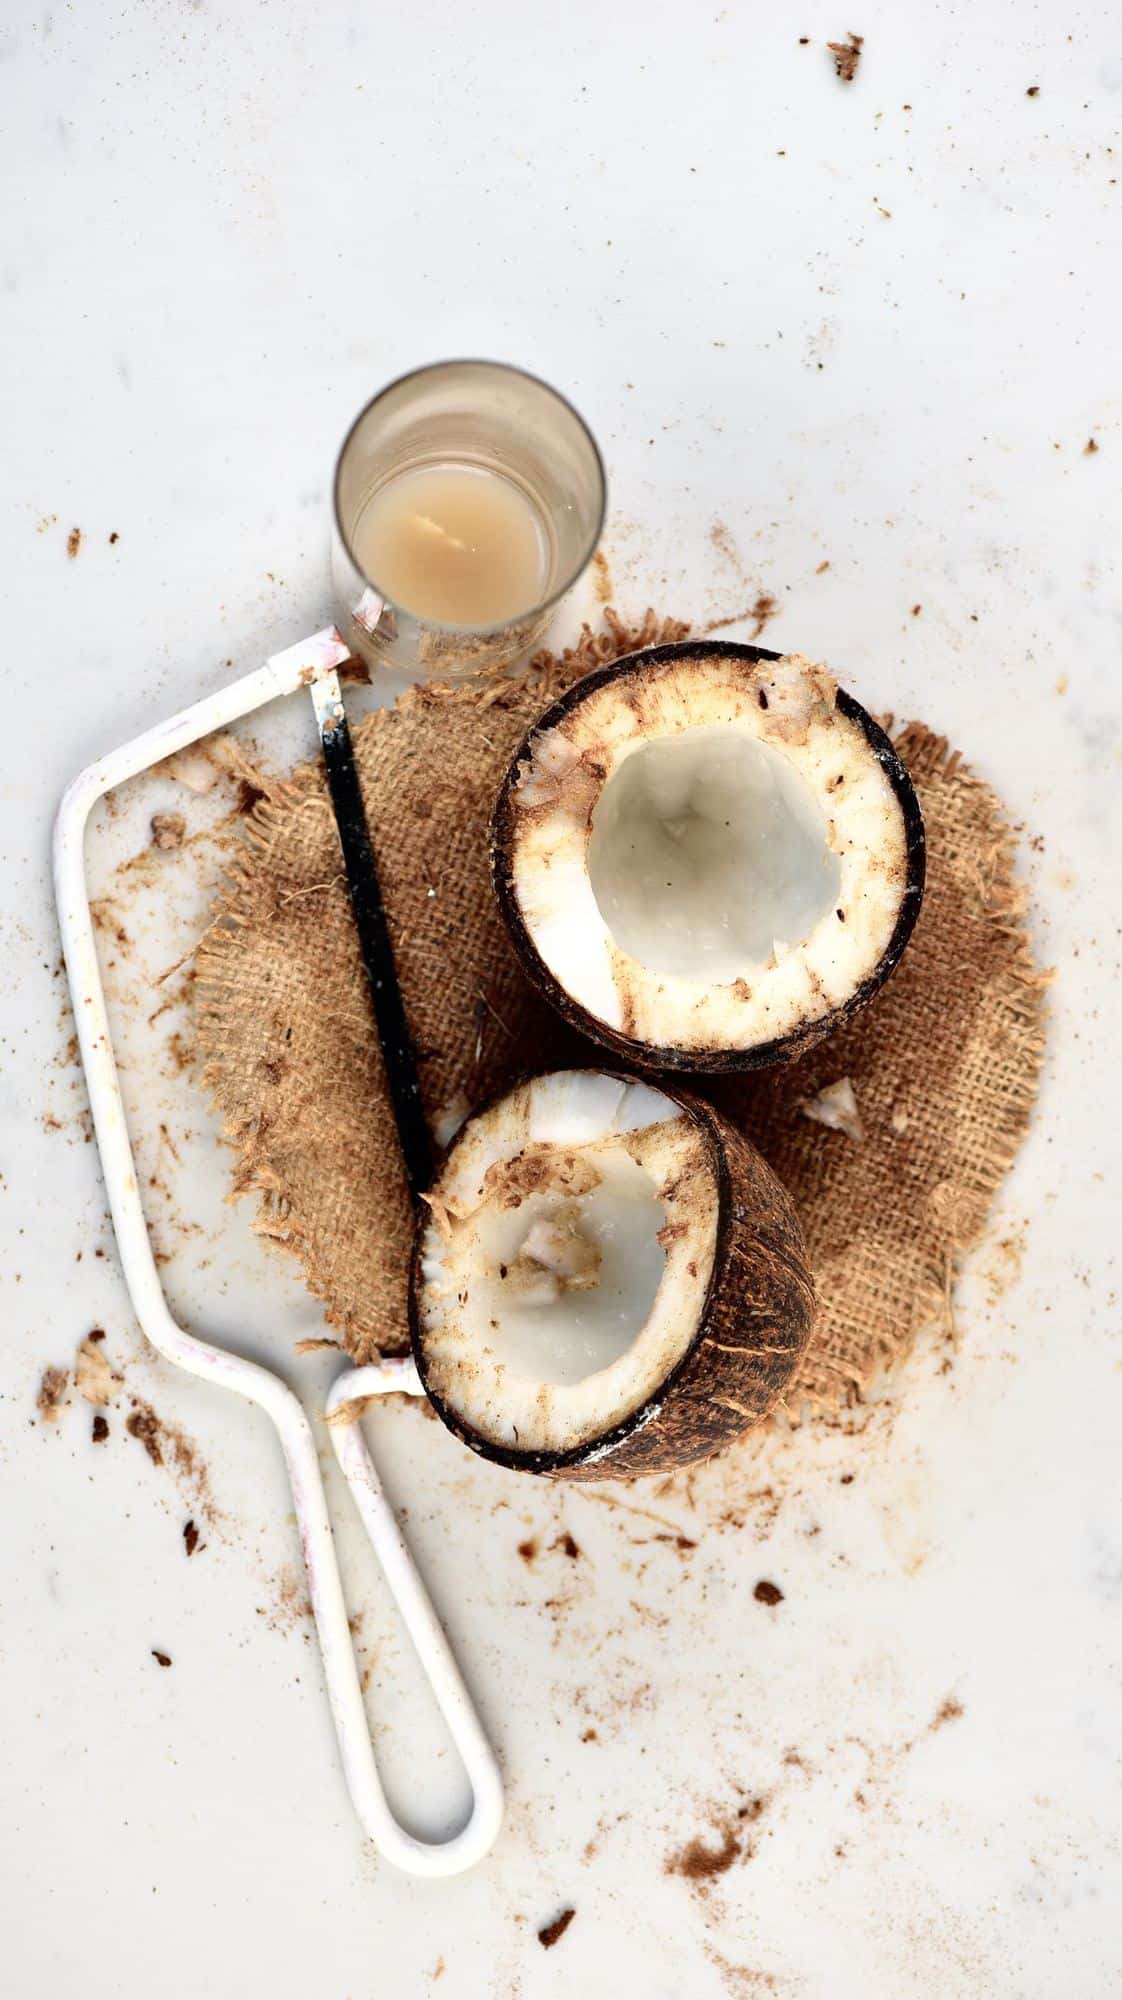 How to Make a Coconut Bowl: A Step-by-Step Guide